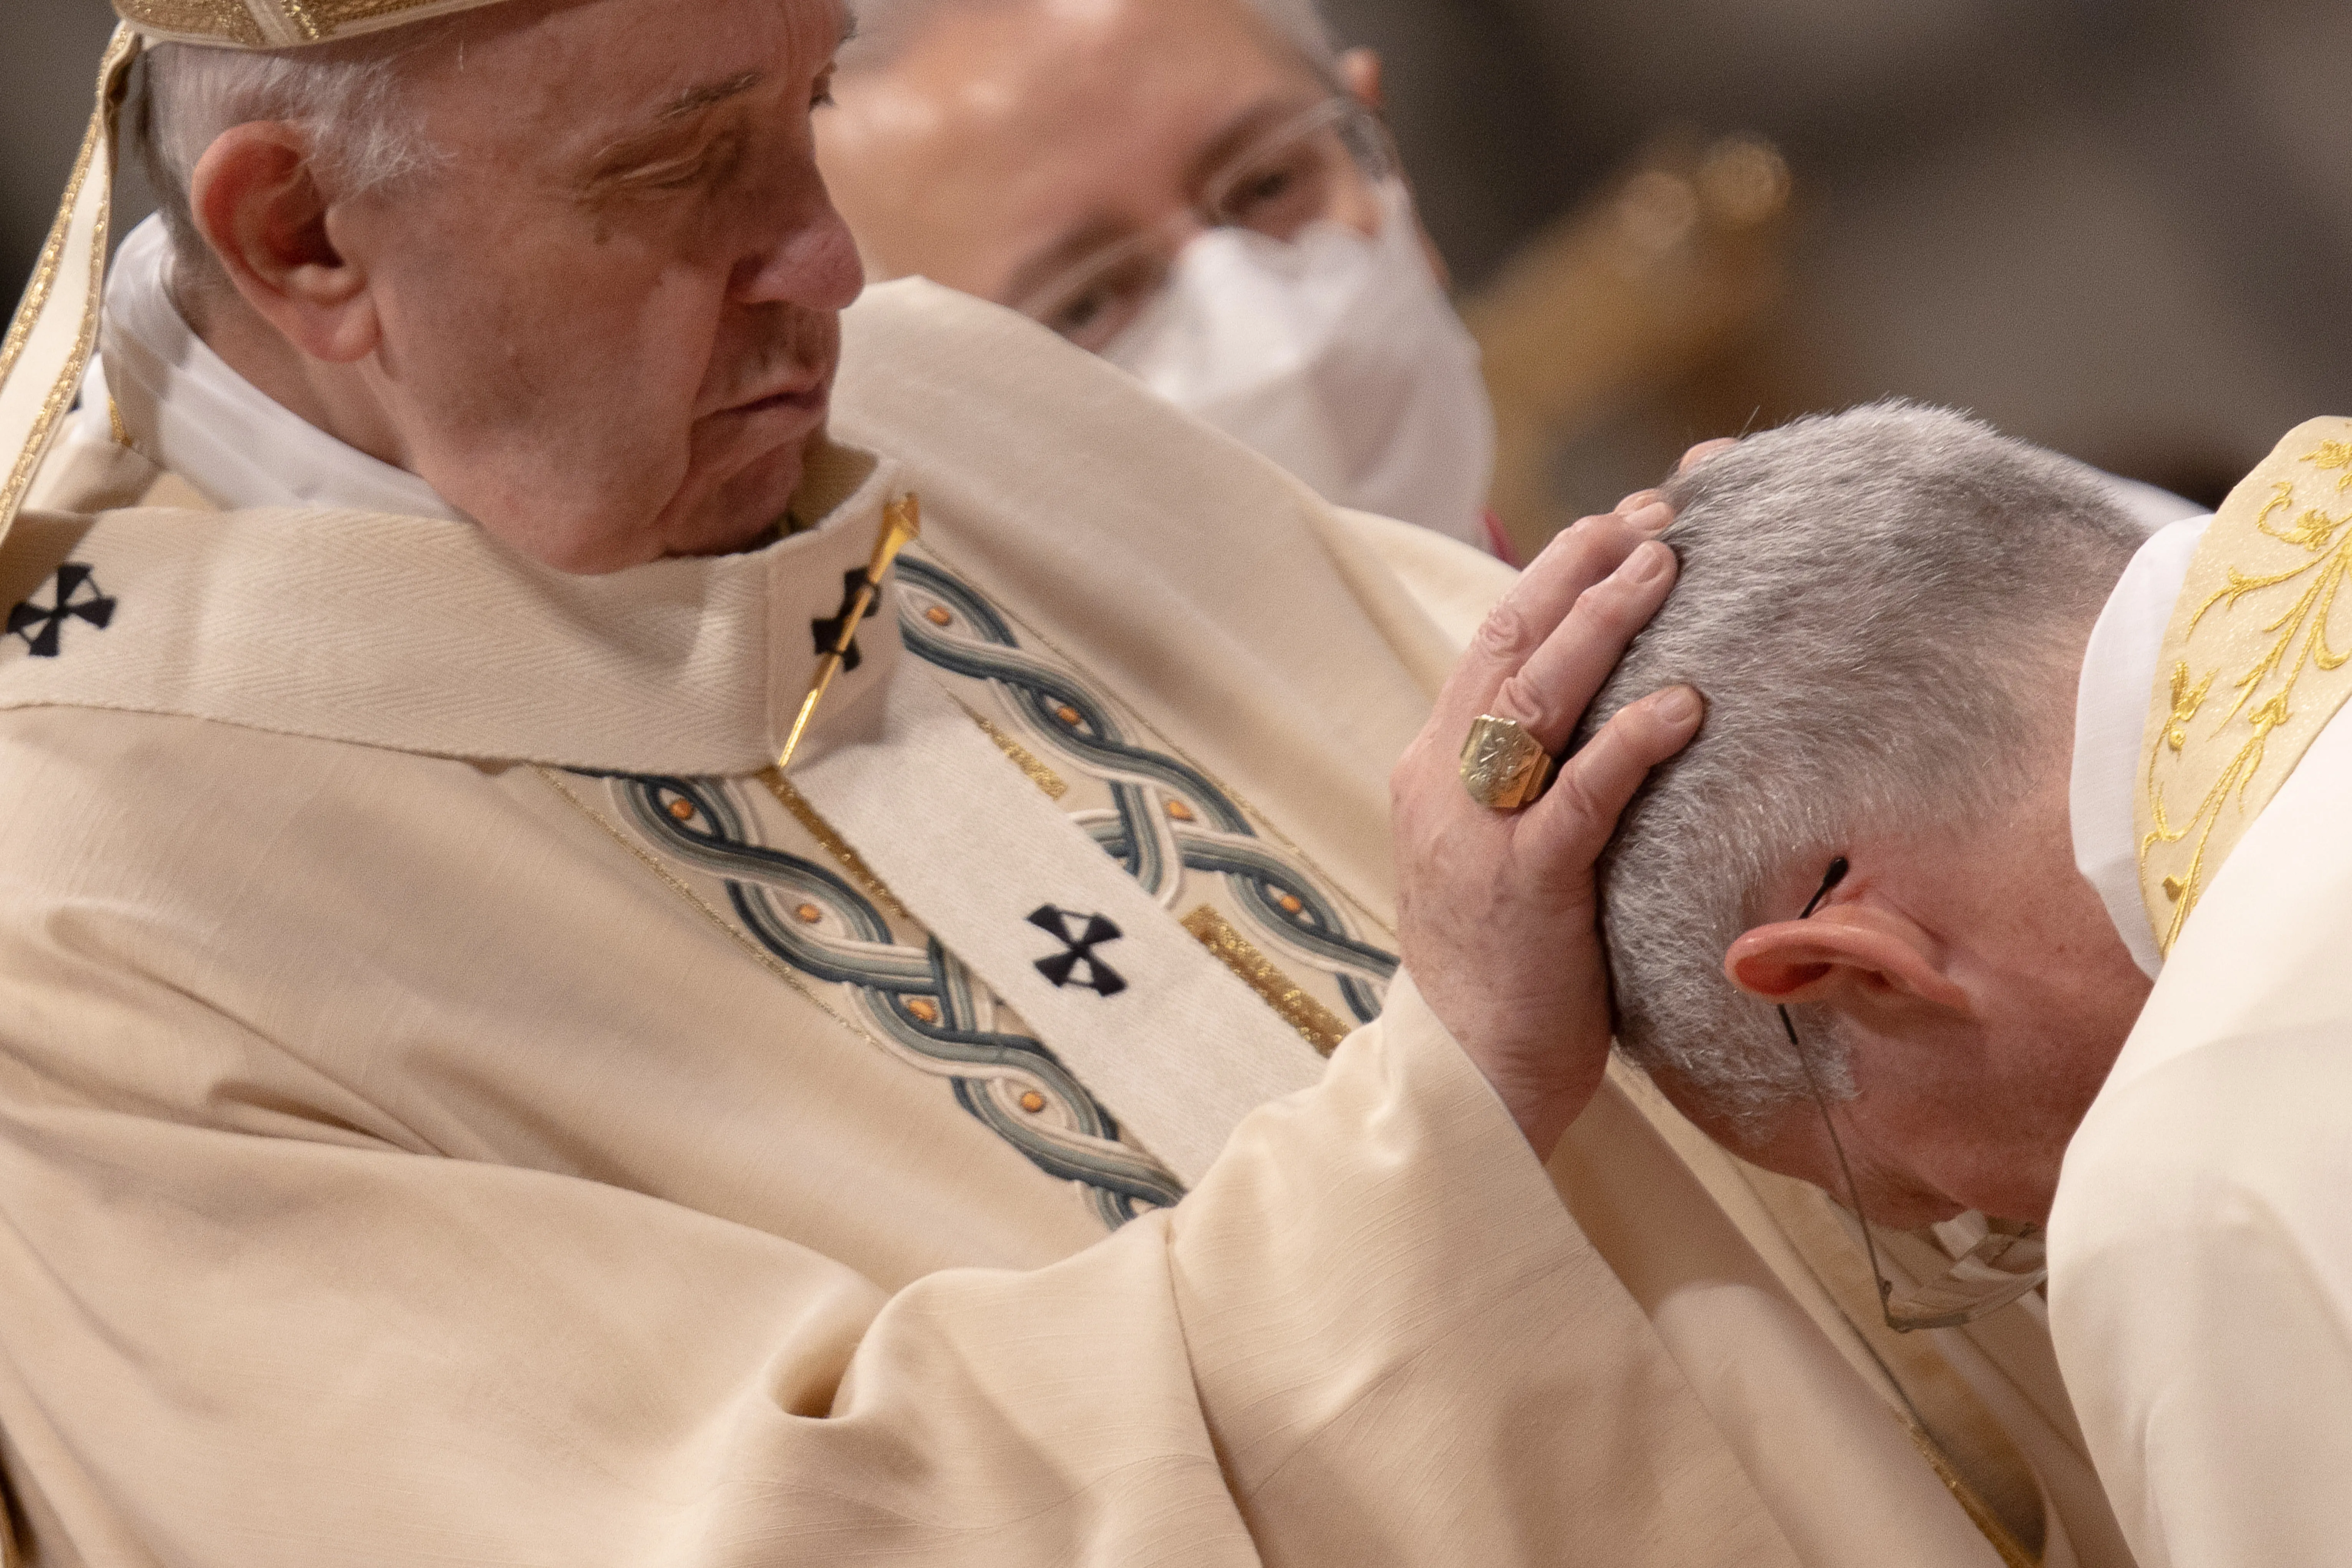 Pope Francis lays his hands on the head of Guido Marini during his episcopal consecration in St. Peter's Basilica Oct. 17, 2021?w=200&h=150